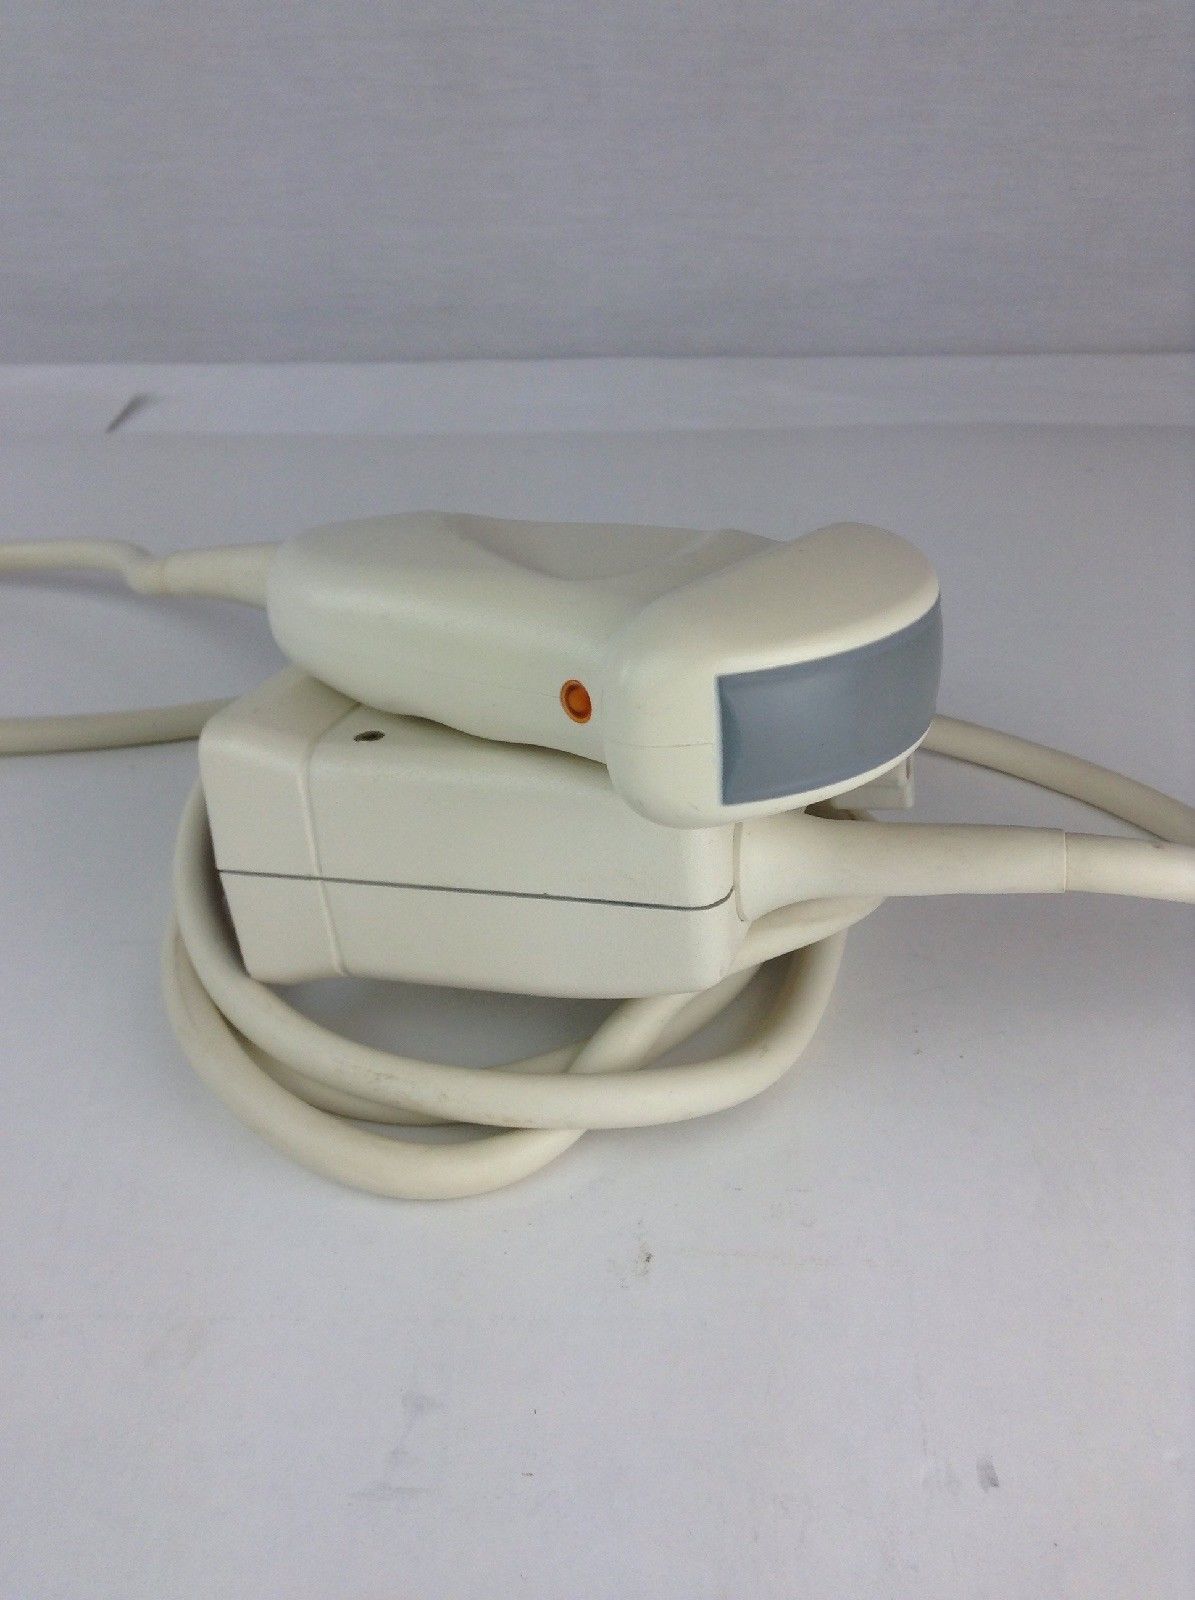 Philips ATL Ultrasound Transducer Curved Array C5-2 40R